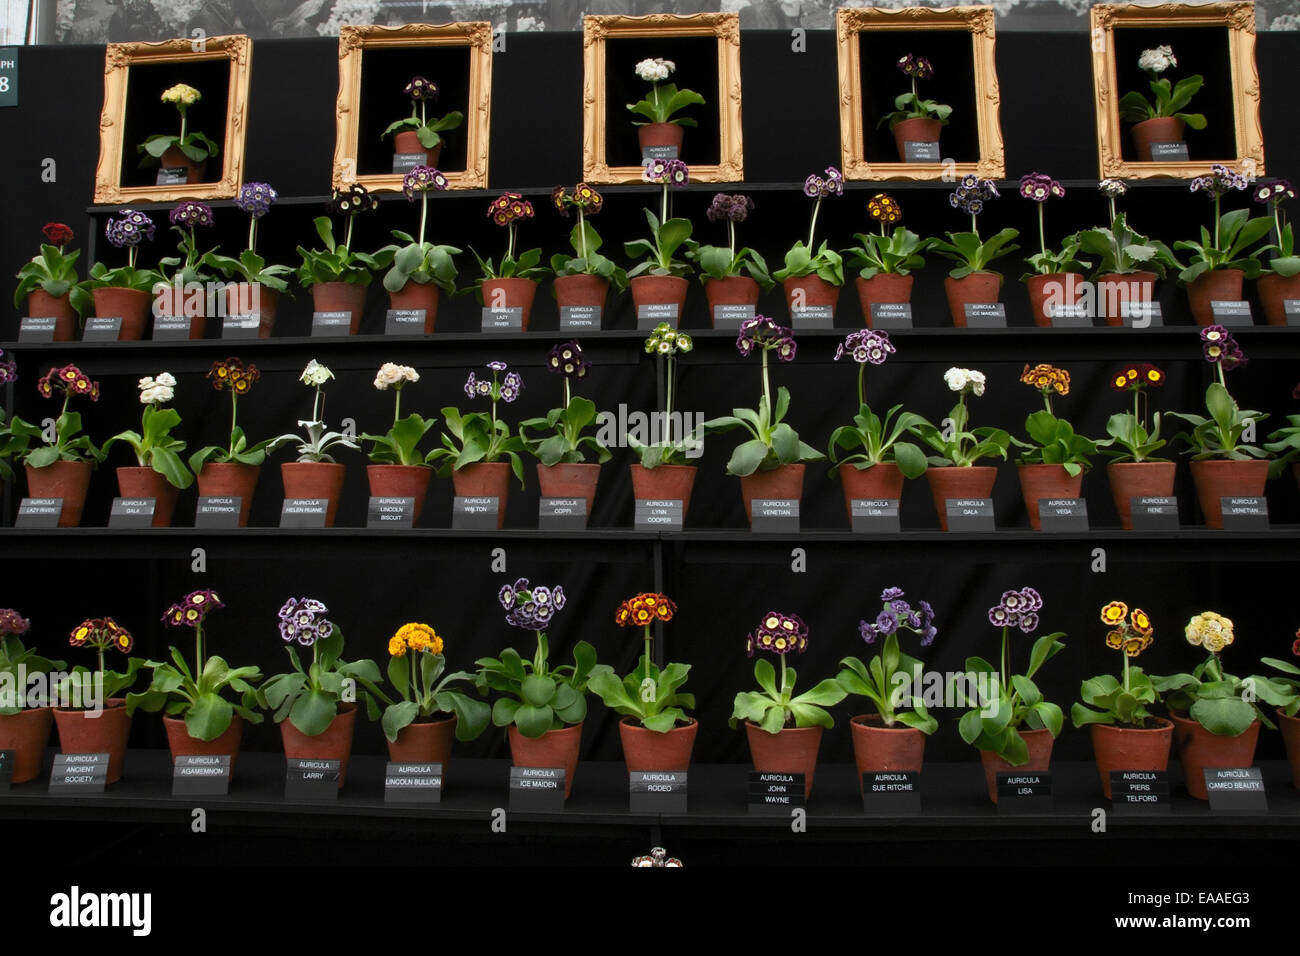 Chelsea Flower Show 2014. Auricula stand Banque D'Images